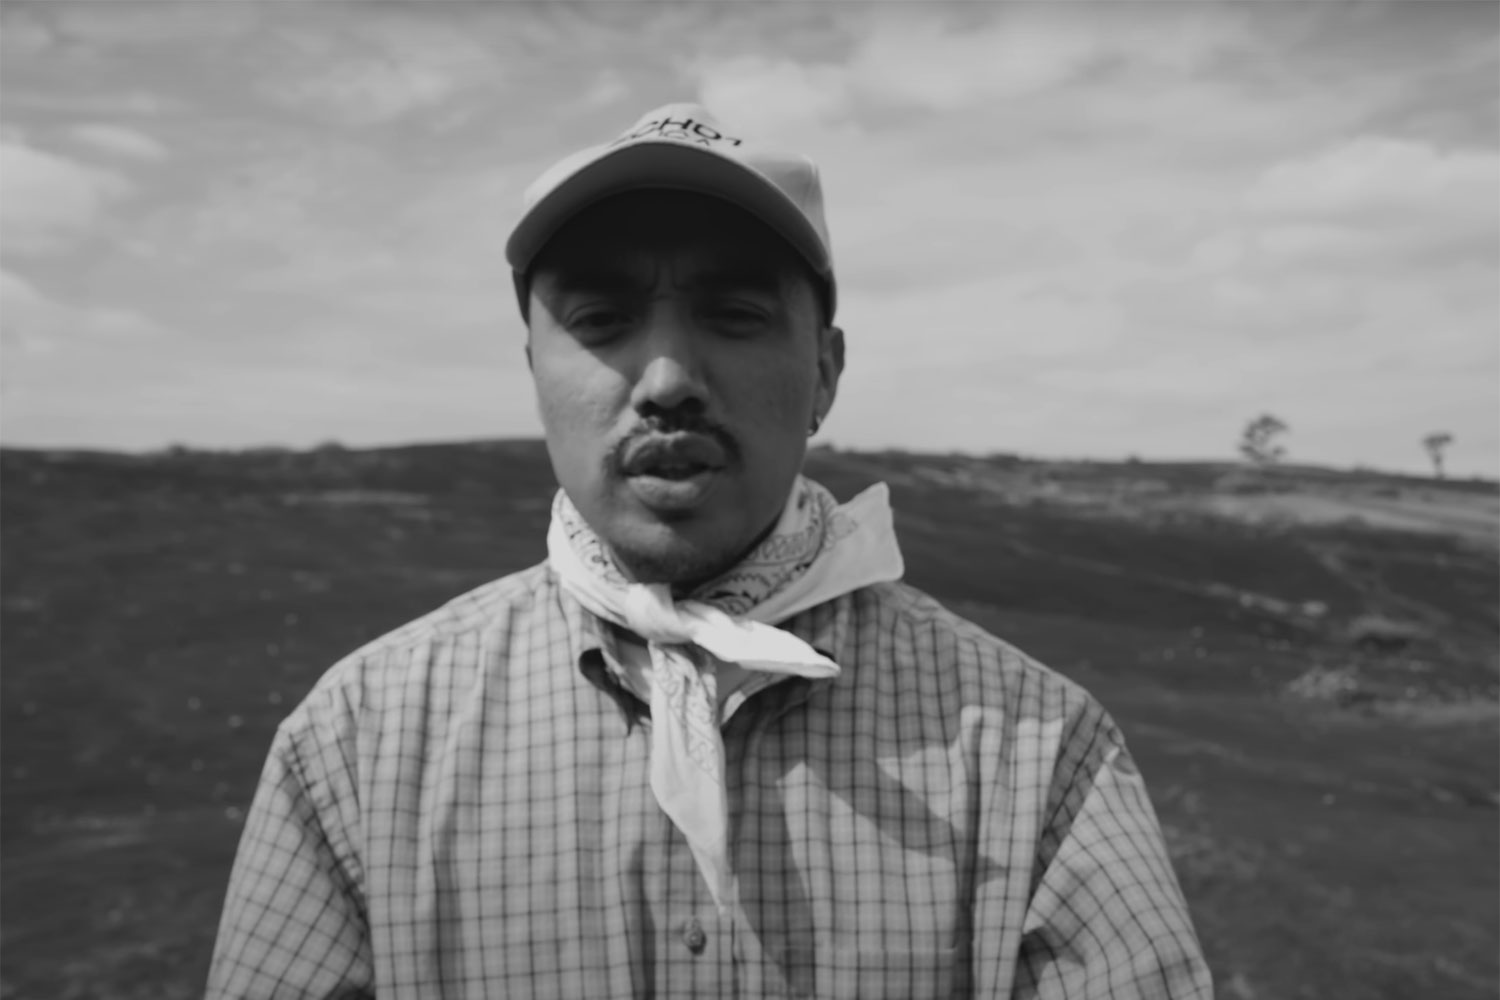 Victor Mariachi standing in a field wearing a baseball cap and scarf